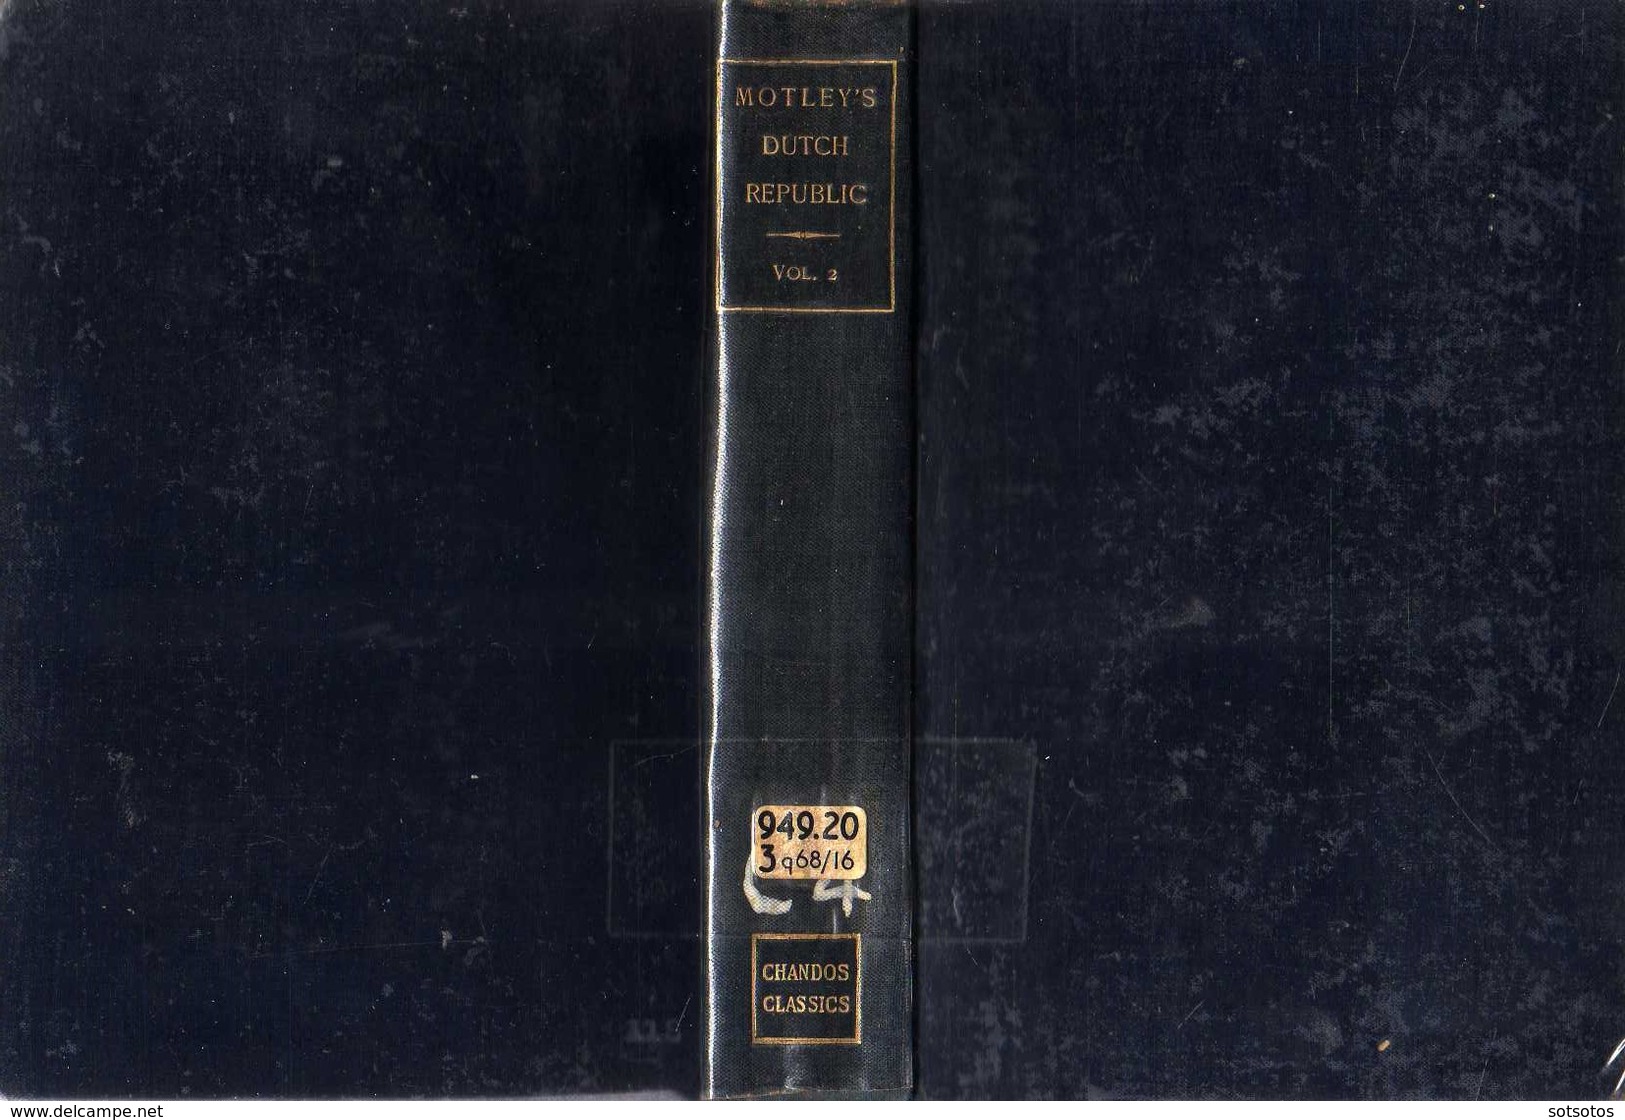 The RISE Of The DUTCH REPUBLIC Vol. II: J. LOTHROP MOTLEY And A.J. MANSFIELD, Ed. Fr. WARNE (1902?), 572 Pages, Good Con - Ancient